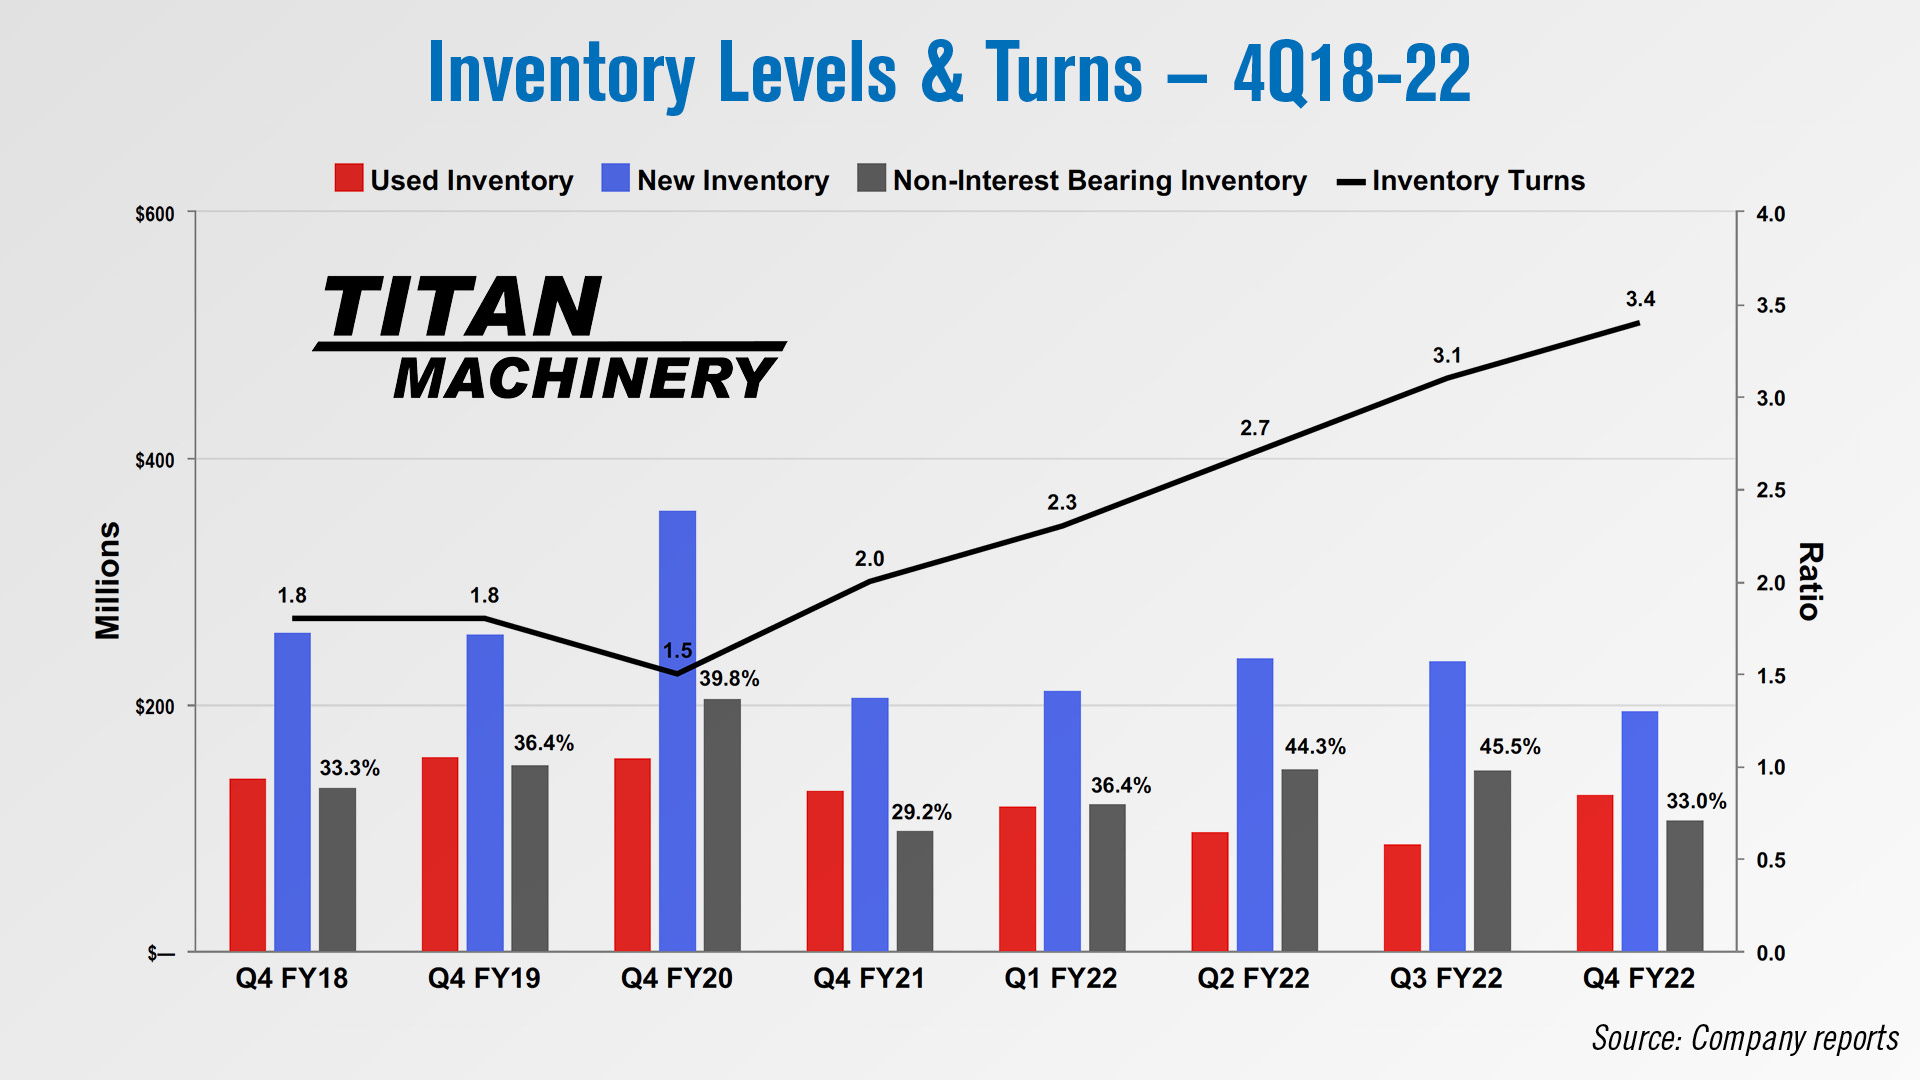 Titan machinery FY22 inventories and turns